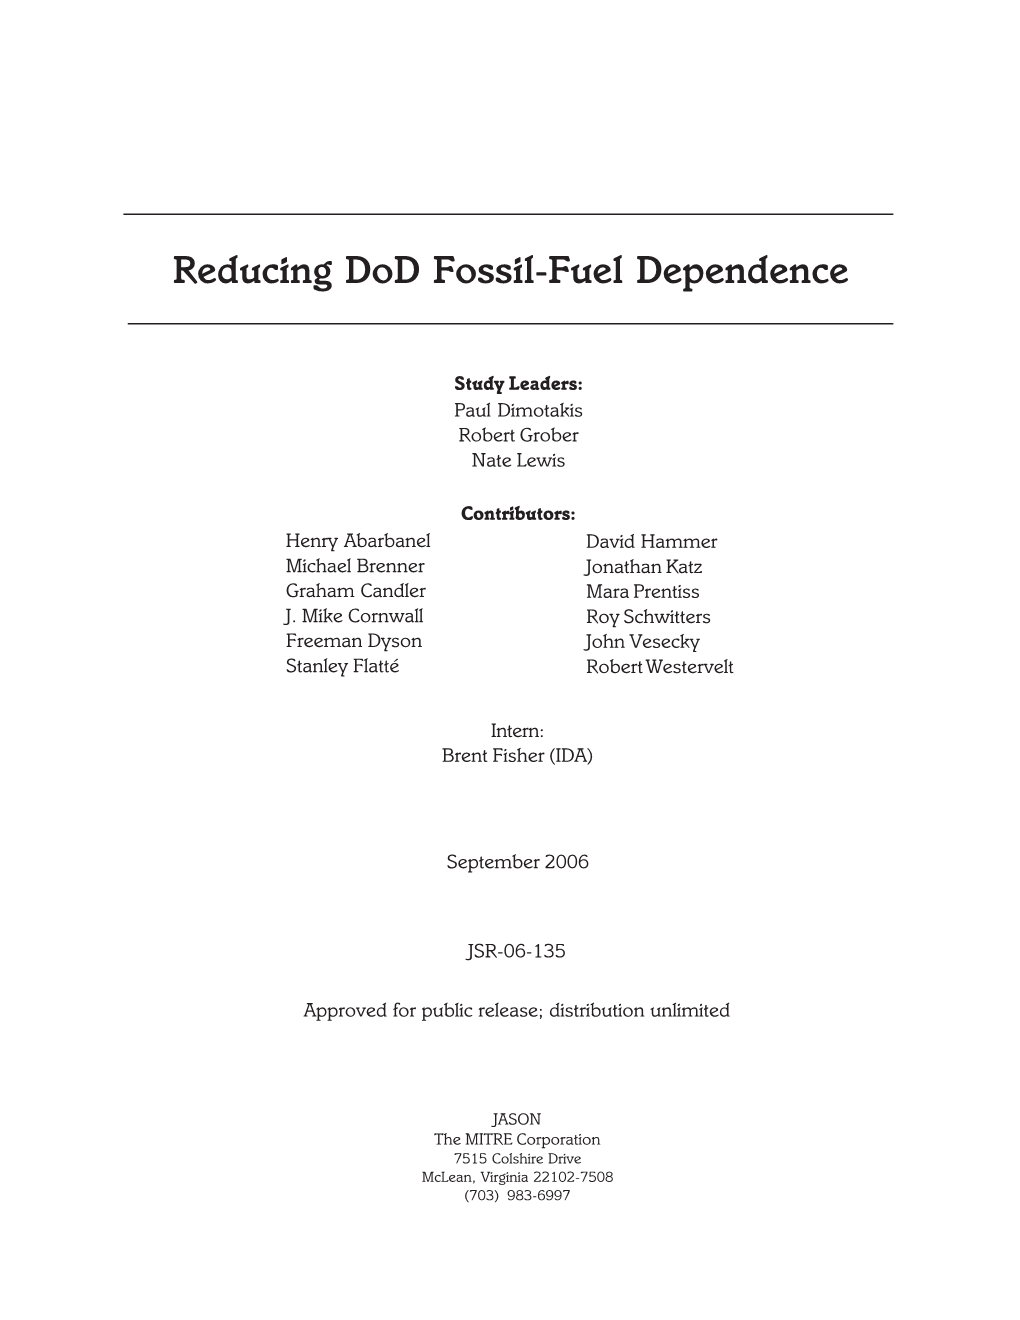 Reducing Dod Fossil-Fuel Dependence